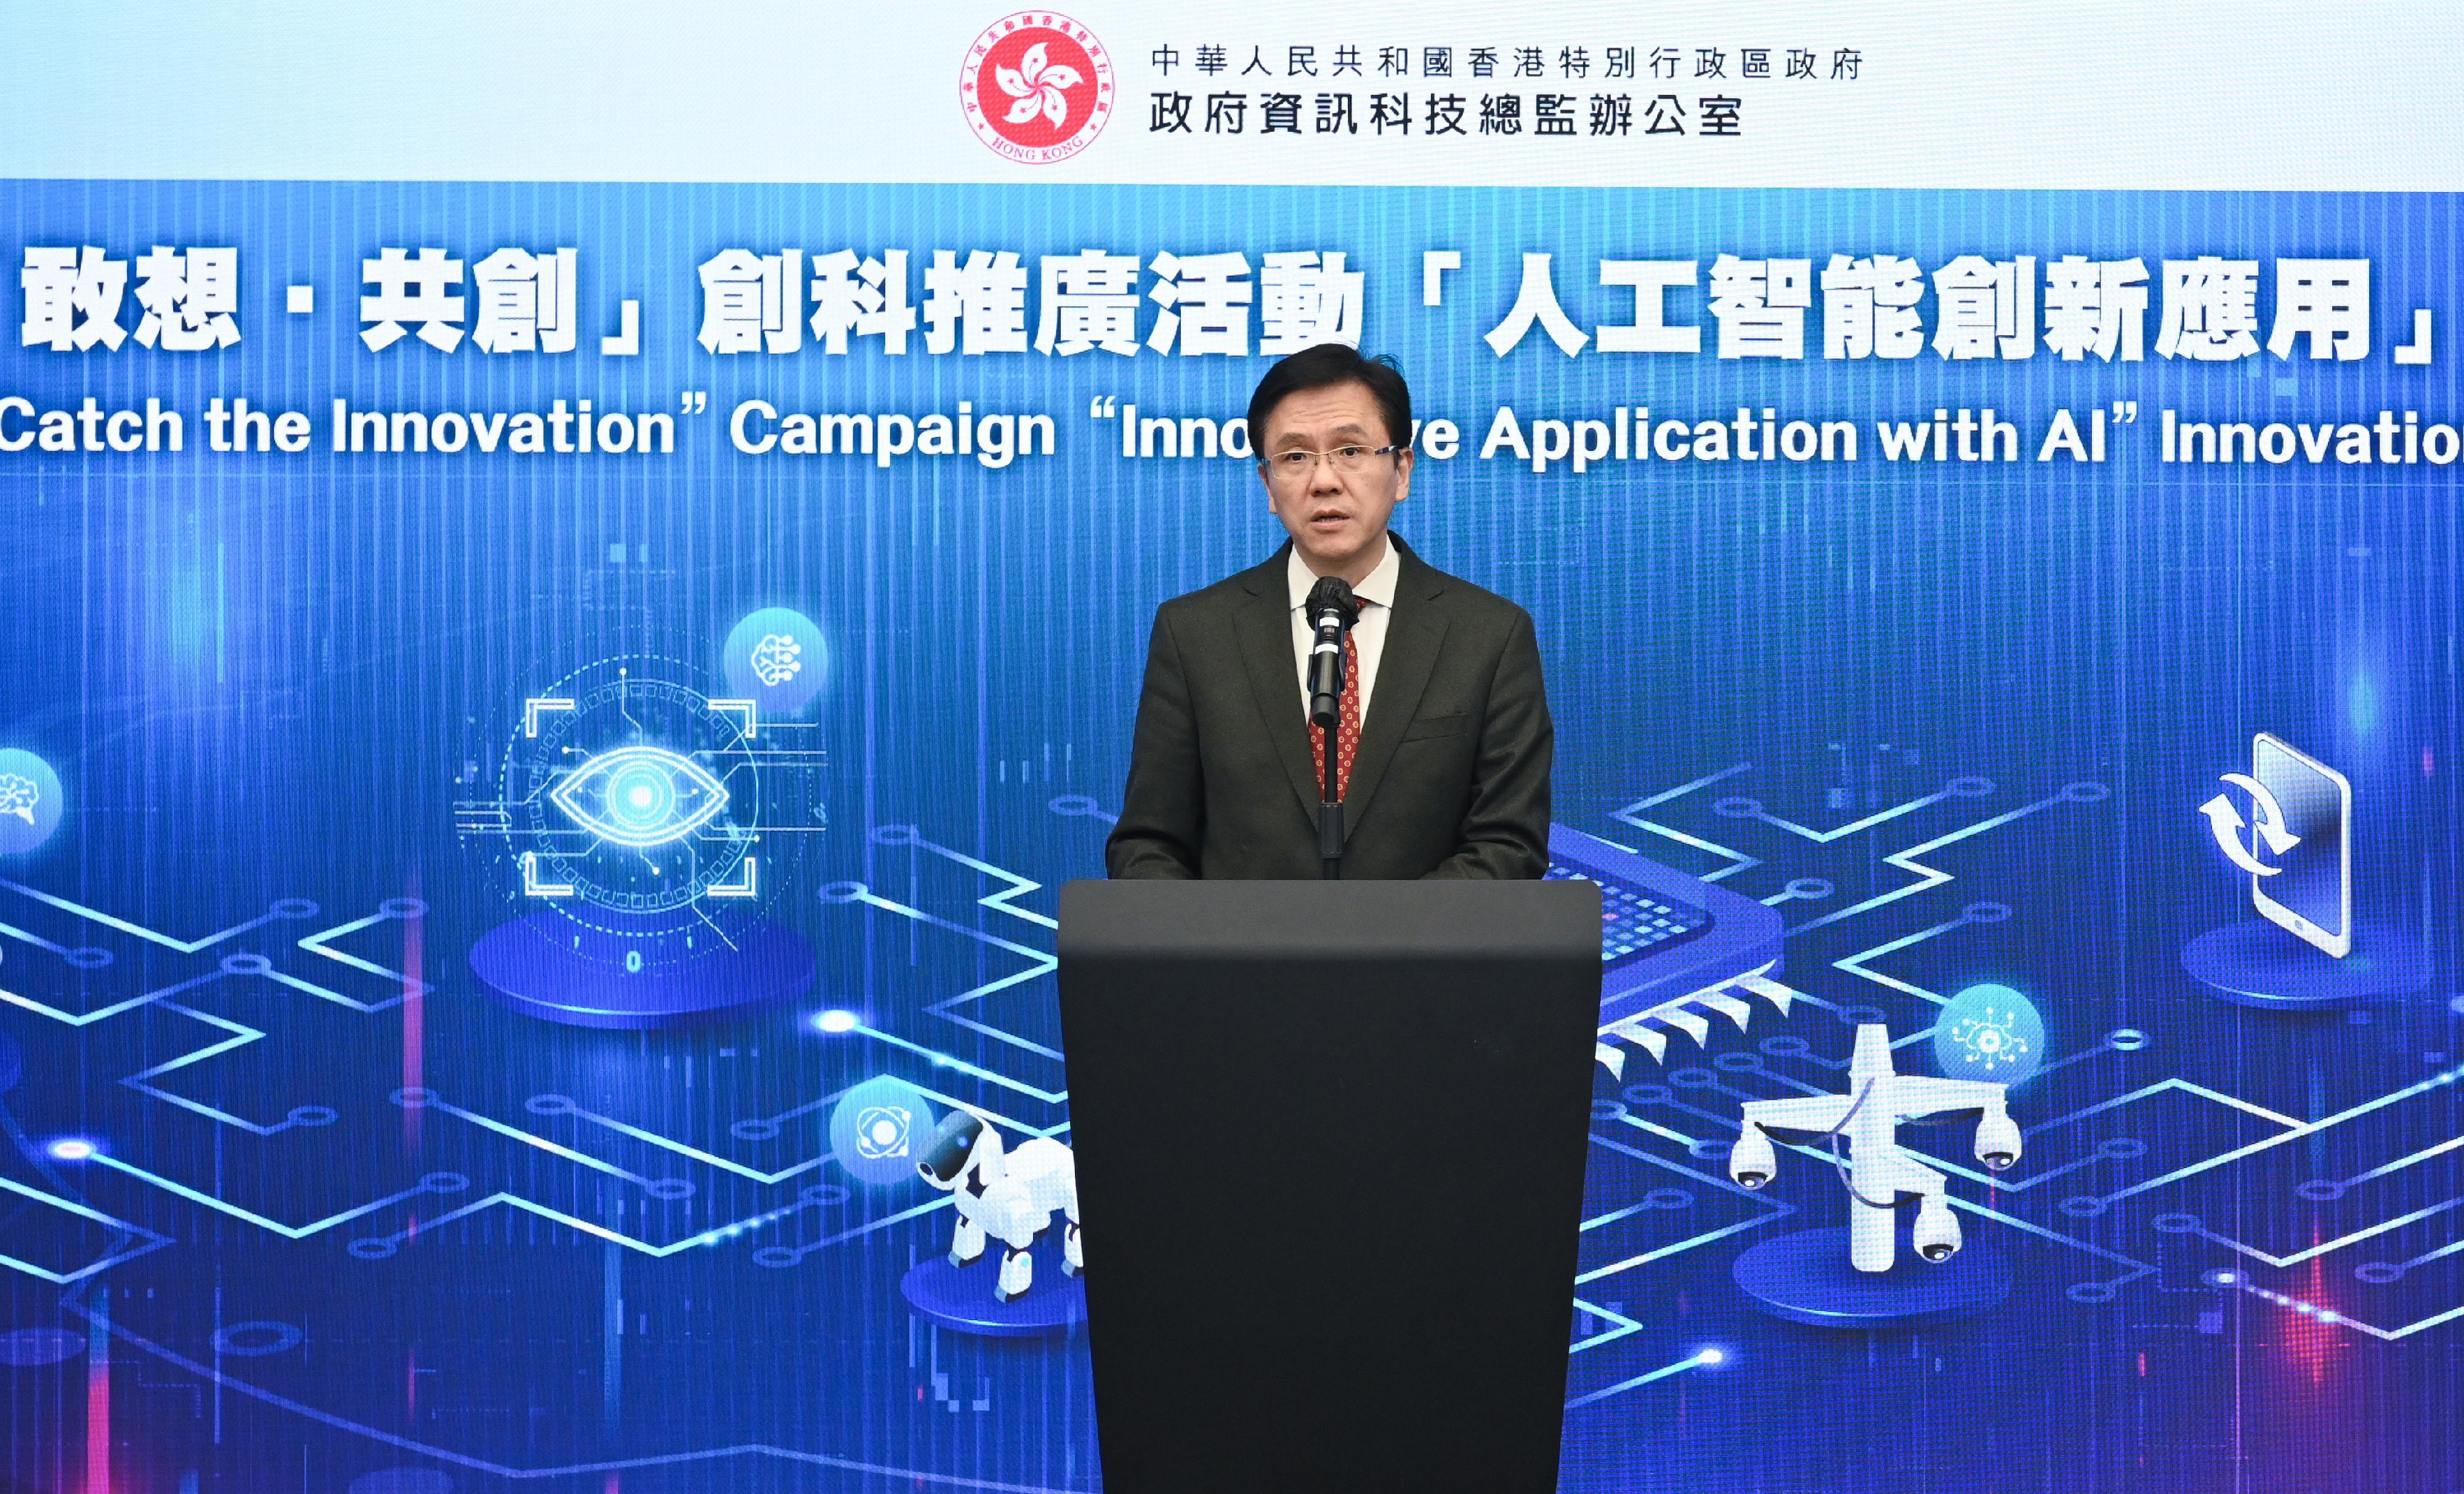 The Secretary for Innovation, Technology and Industry, Professor Sun Dong, speaks at the Award Presentation Ceremony for the "Innovative Application with AI" Innovation Competition today (March 15).